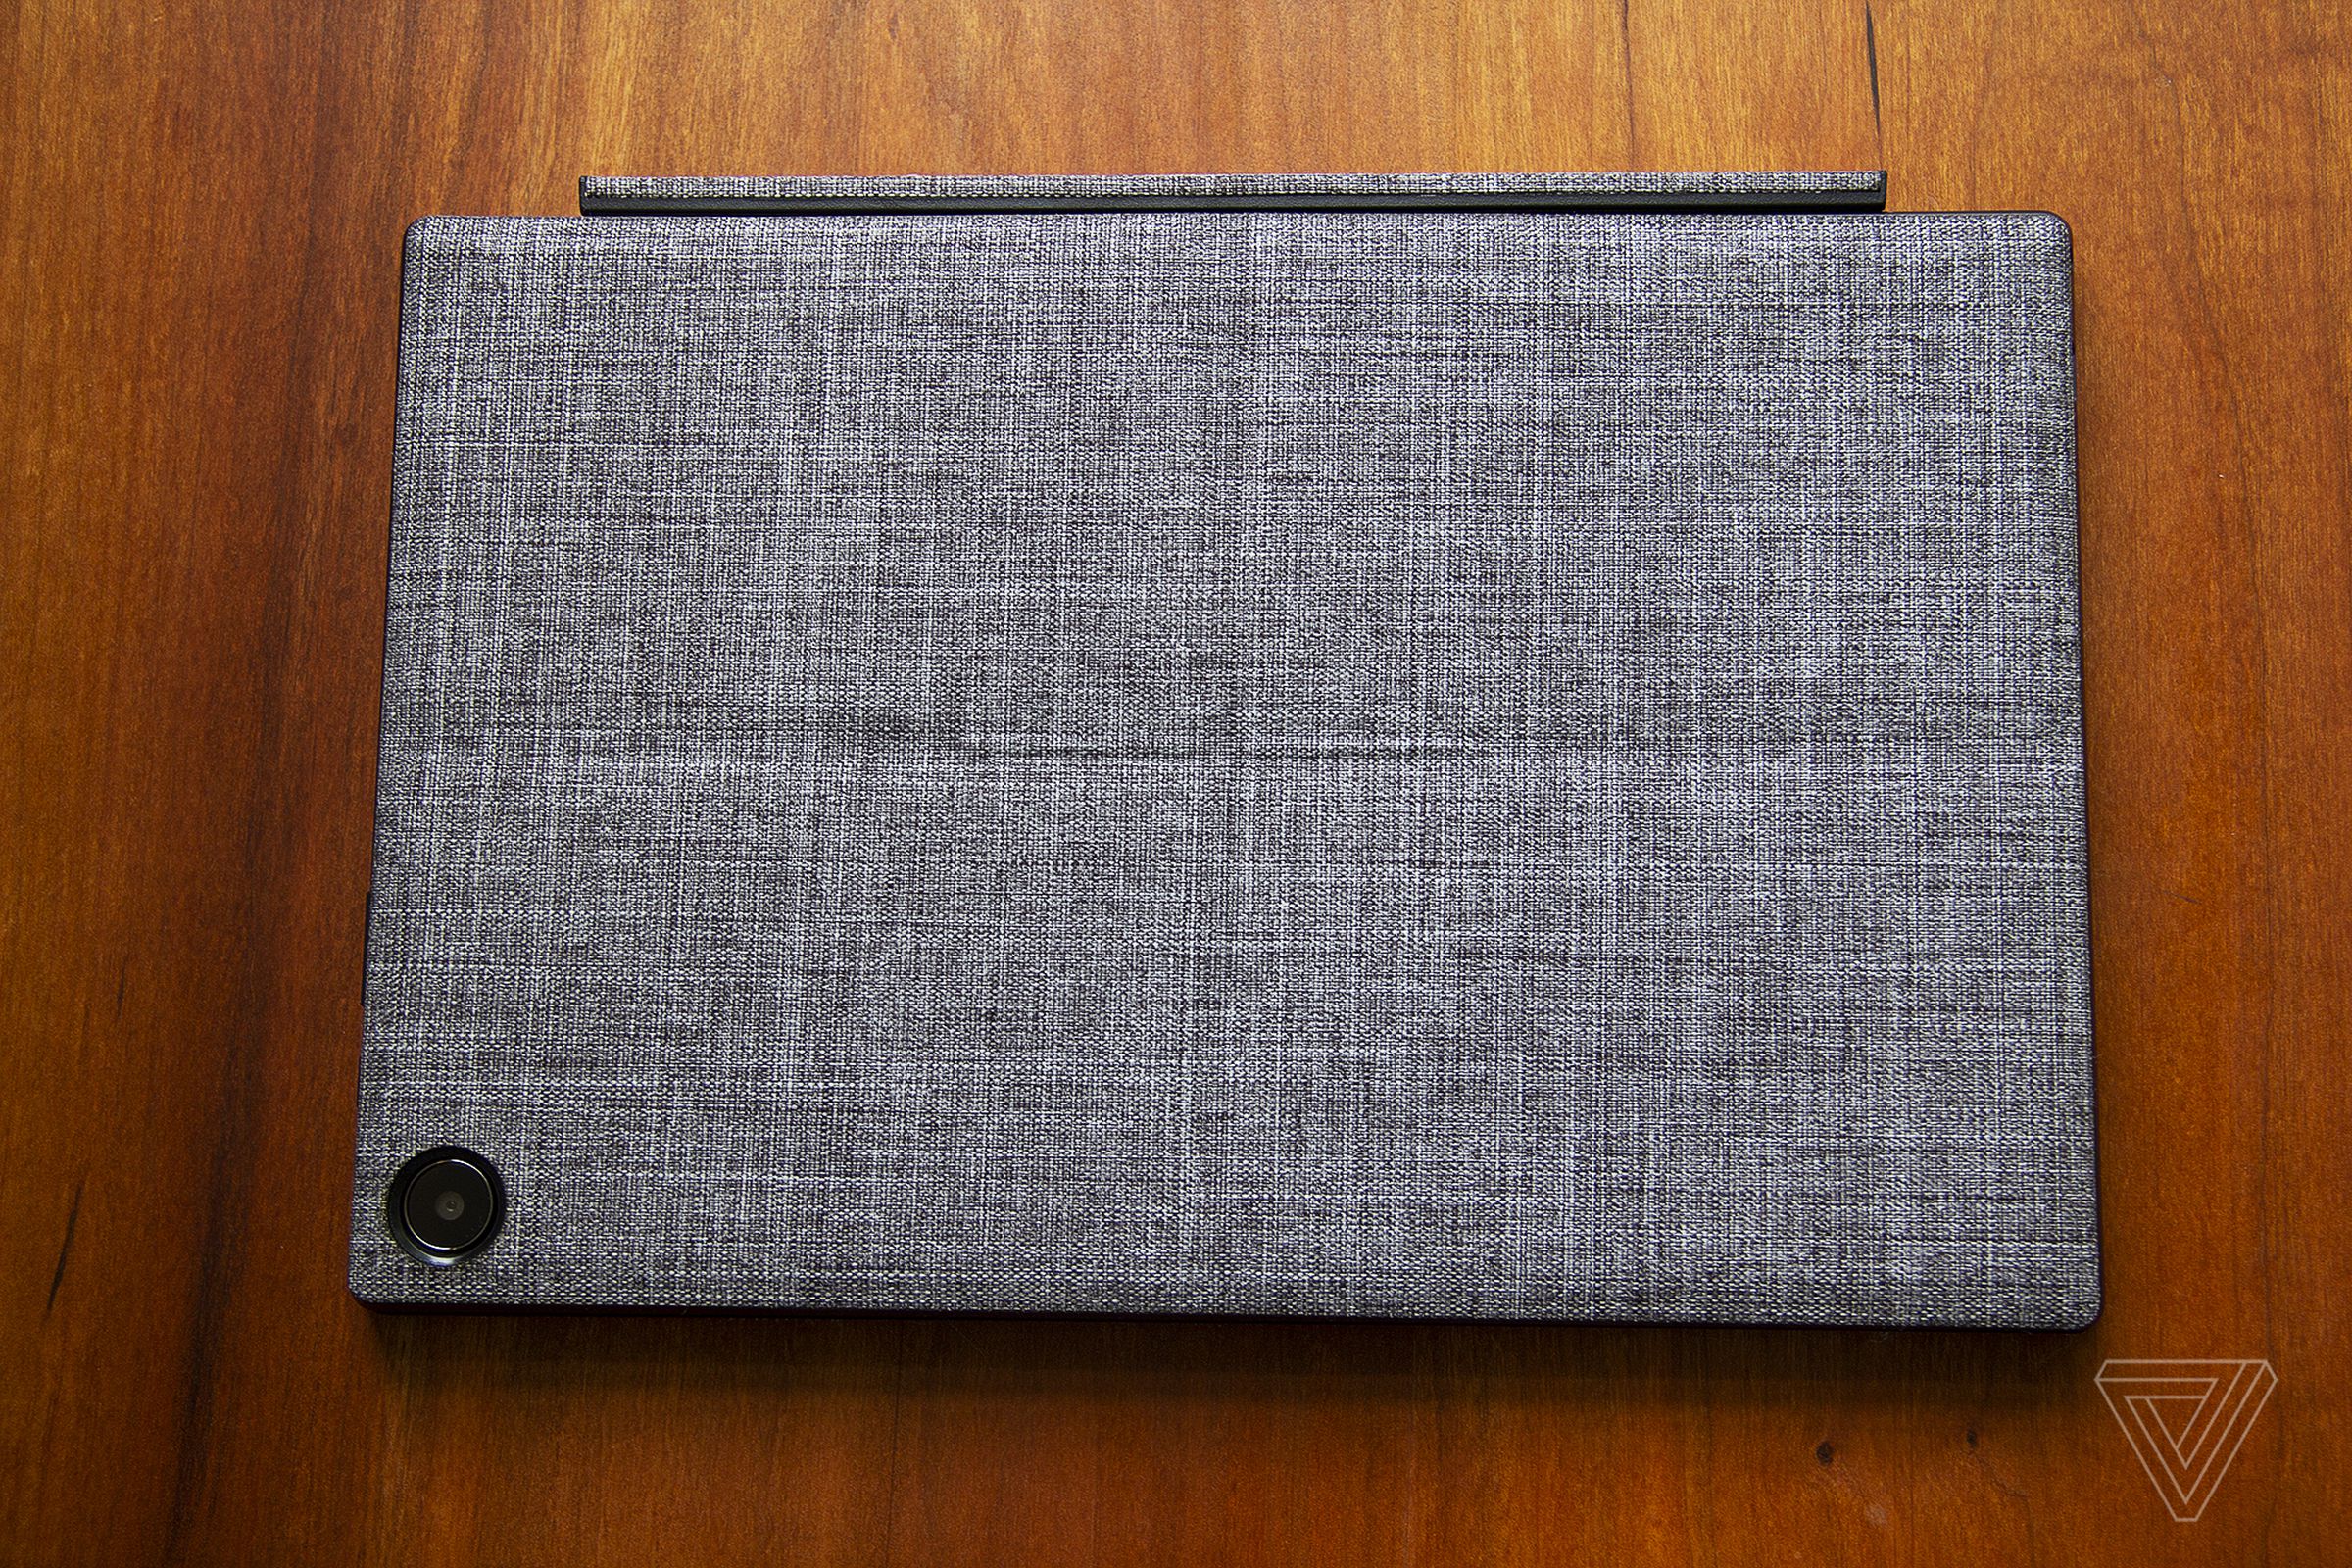 The Asus Chromebook Detachable CM3 closed with the camera facing upwards, seen from above.